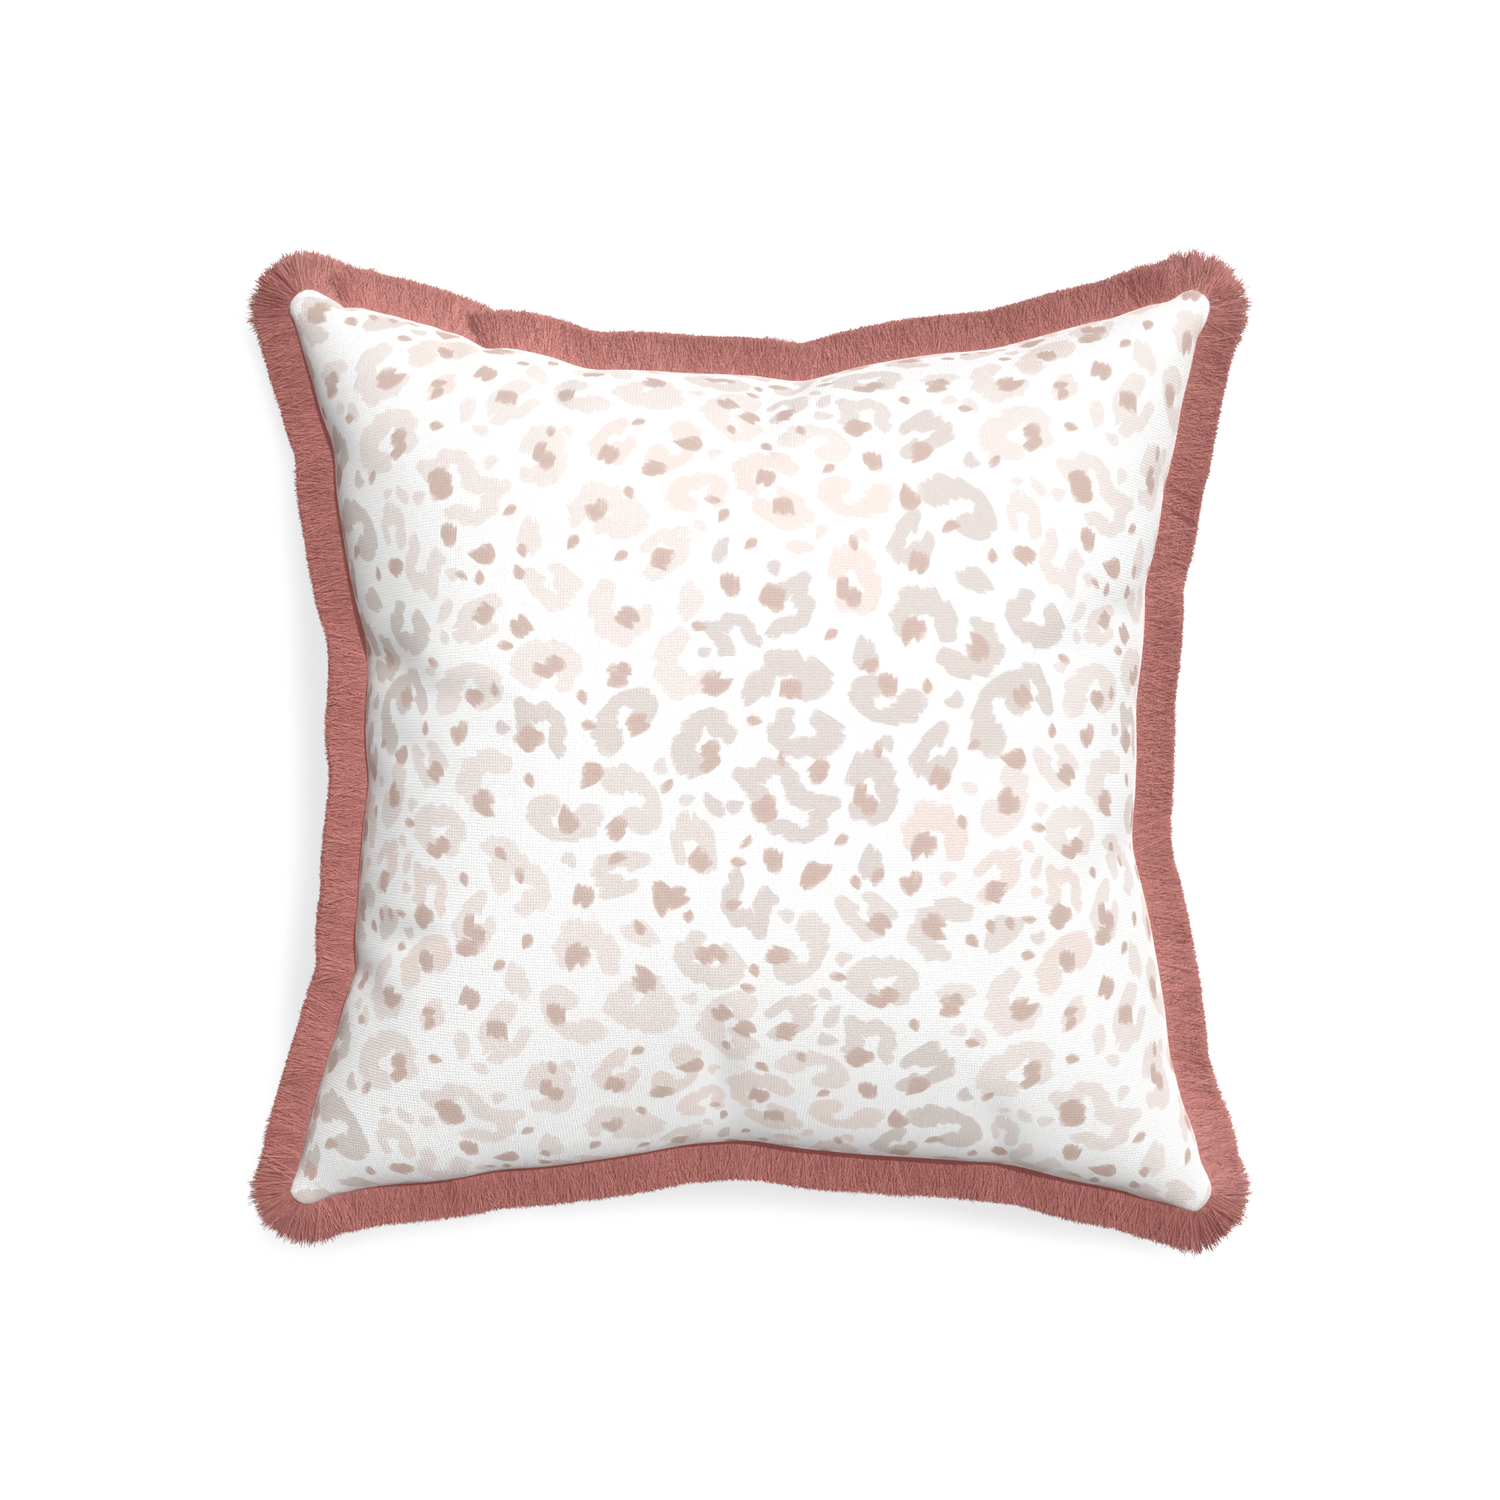 20-square rosie custom pillow with d fringe on white background